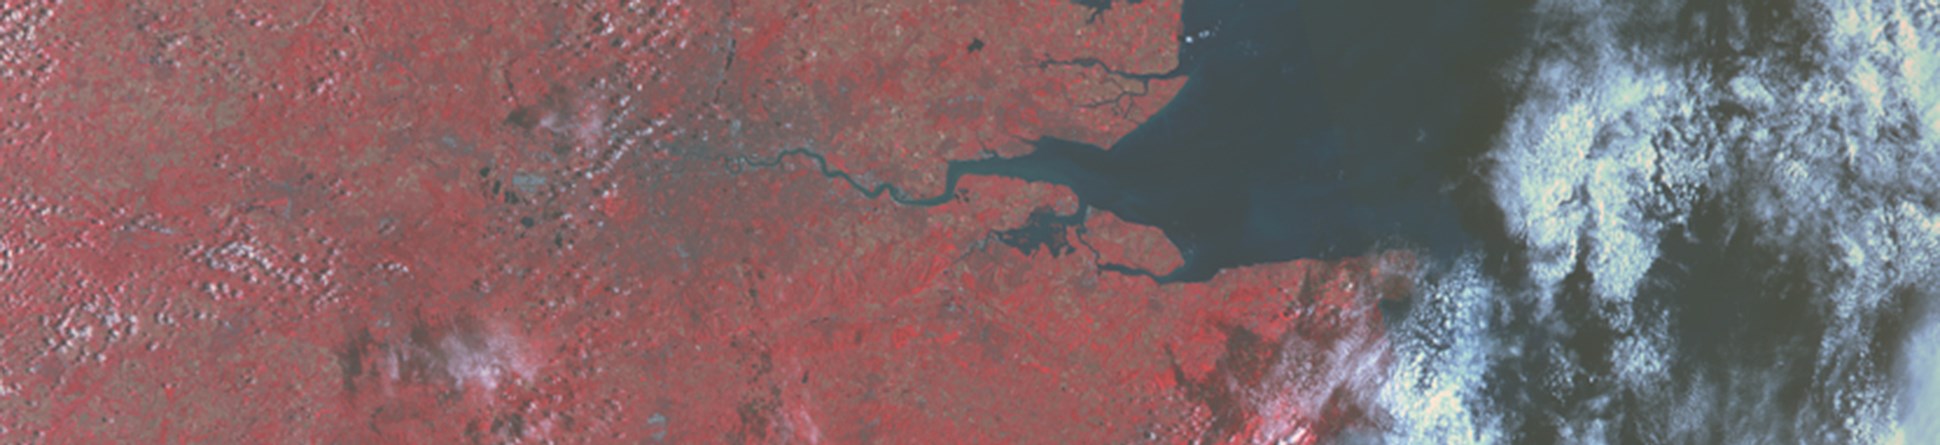 High level satellite image showing the south-east of England in various shades of red with banks of white cloud to right